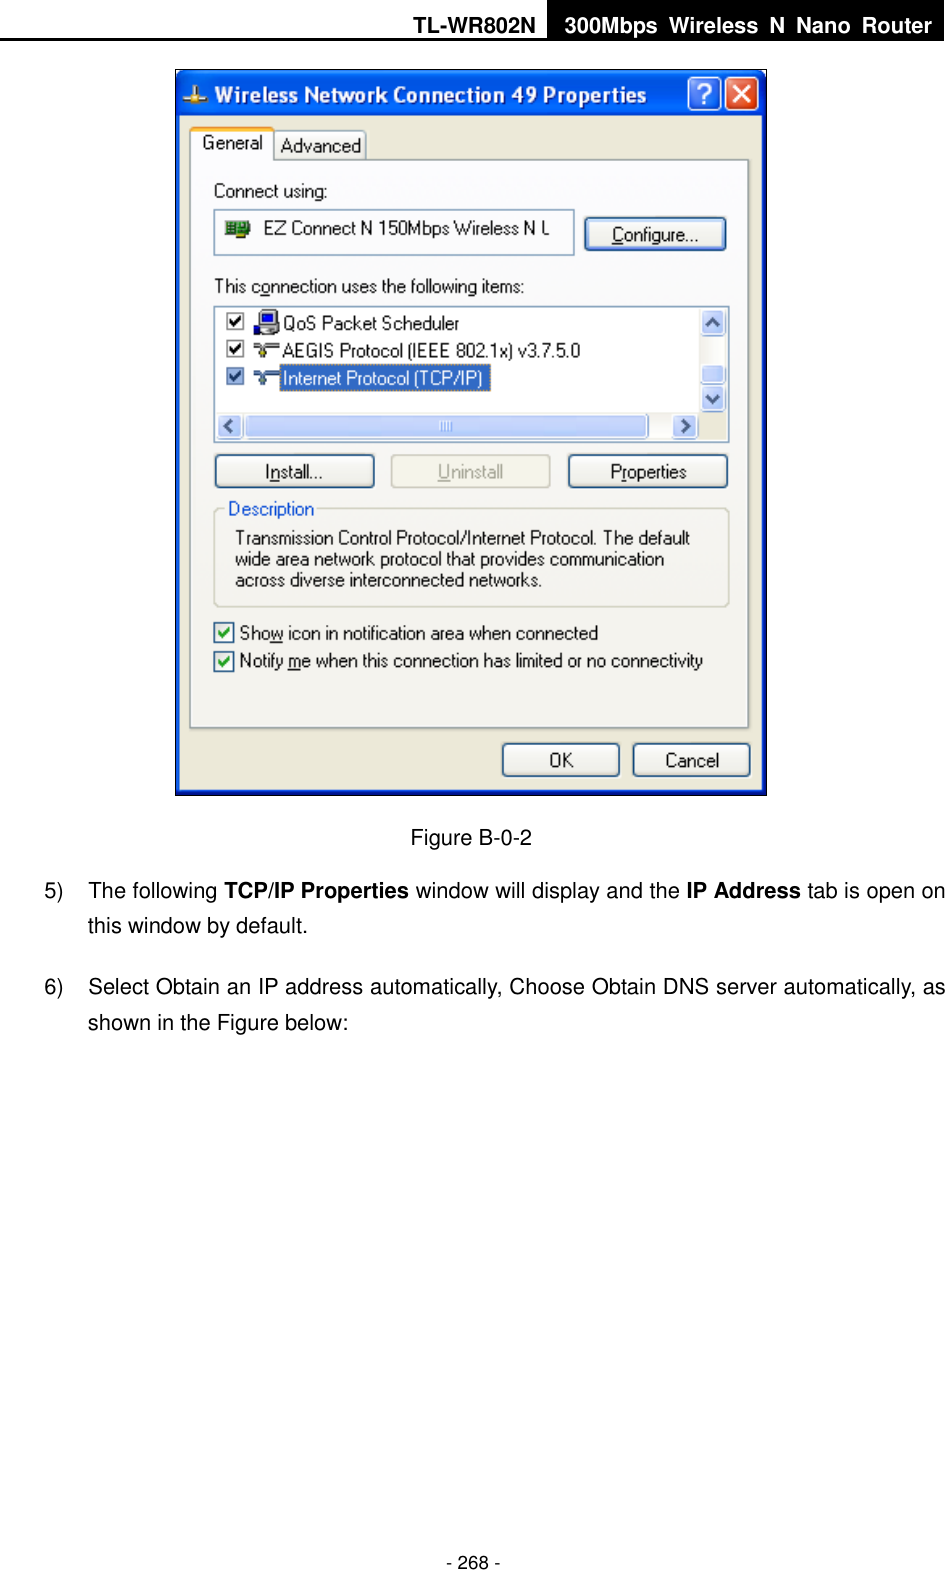 TL-WR802N 300Mbps  Wireless  N  Nano  Router  - 268 -  Figure B-0-2 5)  The following TCP/IP Properties window will display and the IP Address tab is open on this window by default. 6)  Select Obtain an IP address automatically, Choose Obtain DNS server automatically, as shown in the Figure below: 